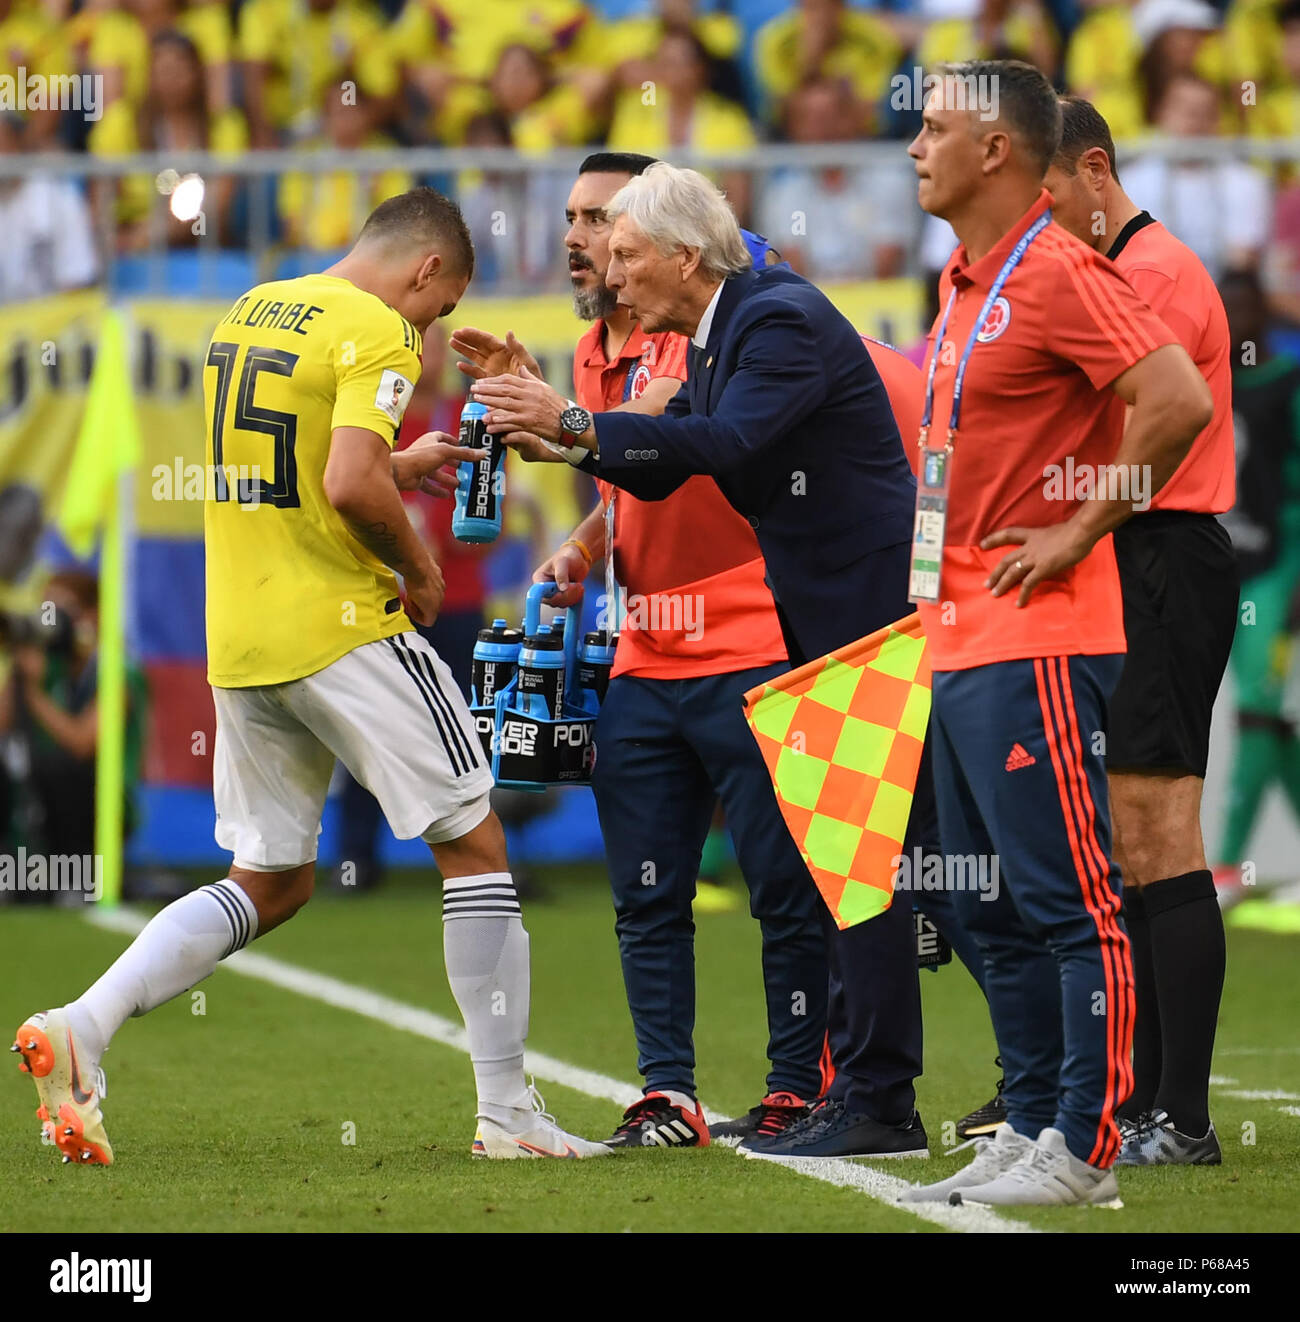 Samara, Russia. 28th June, 2018. Head coach Jose Pekerman (C) of Colombia gives instructions to Mateus Uribe during the 2018 FIFA World Cup Group H match between Colombia and Senegal in Samara, Russia, June 28, 2018. Colombia won 1-0 and advanced to the round of 16. Credit: Chen Cheng/Xinhua/Alamy Live News Stock Photo